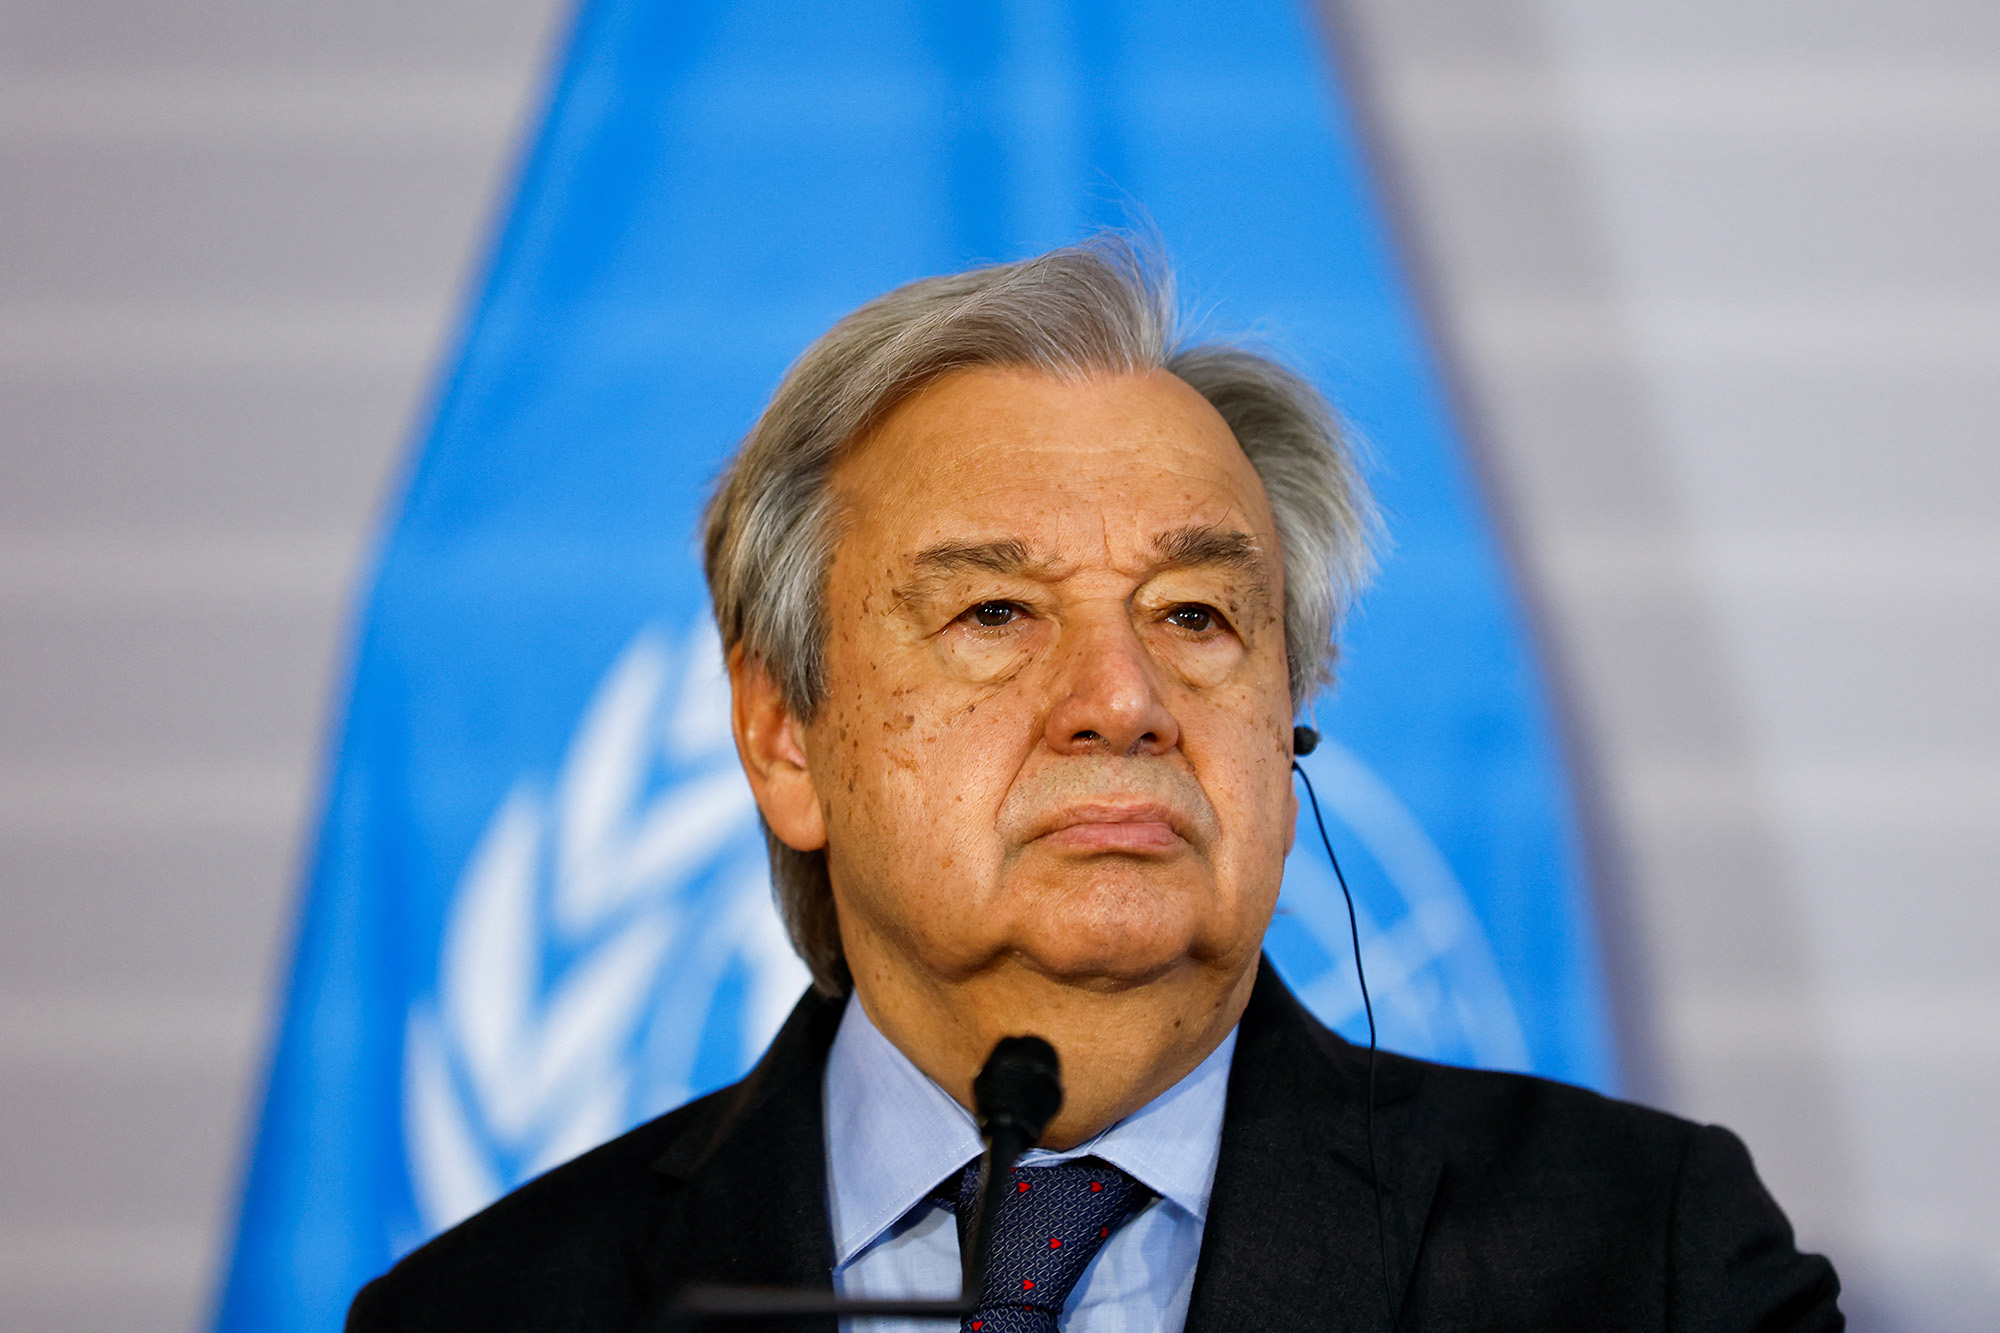 United Nations Secretary-General António Guterres attends a news conference in Vienna, Austria, on May 11.